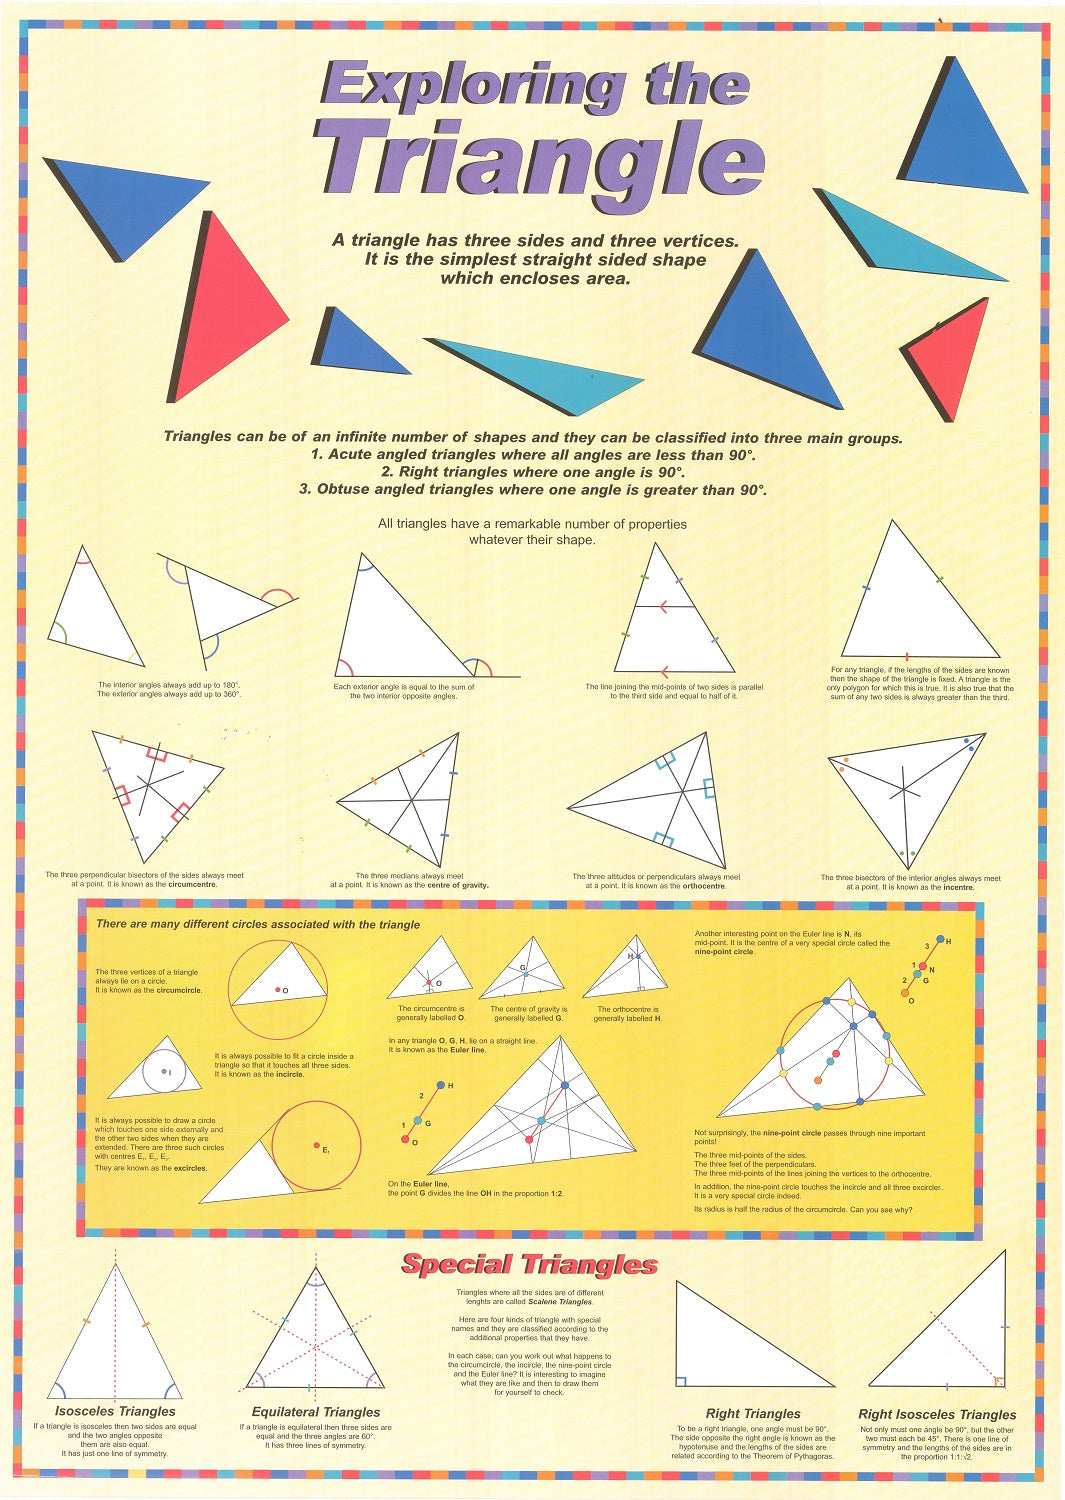 Exploring the Triangle Poster